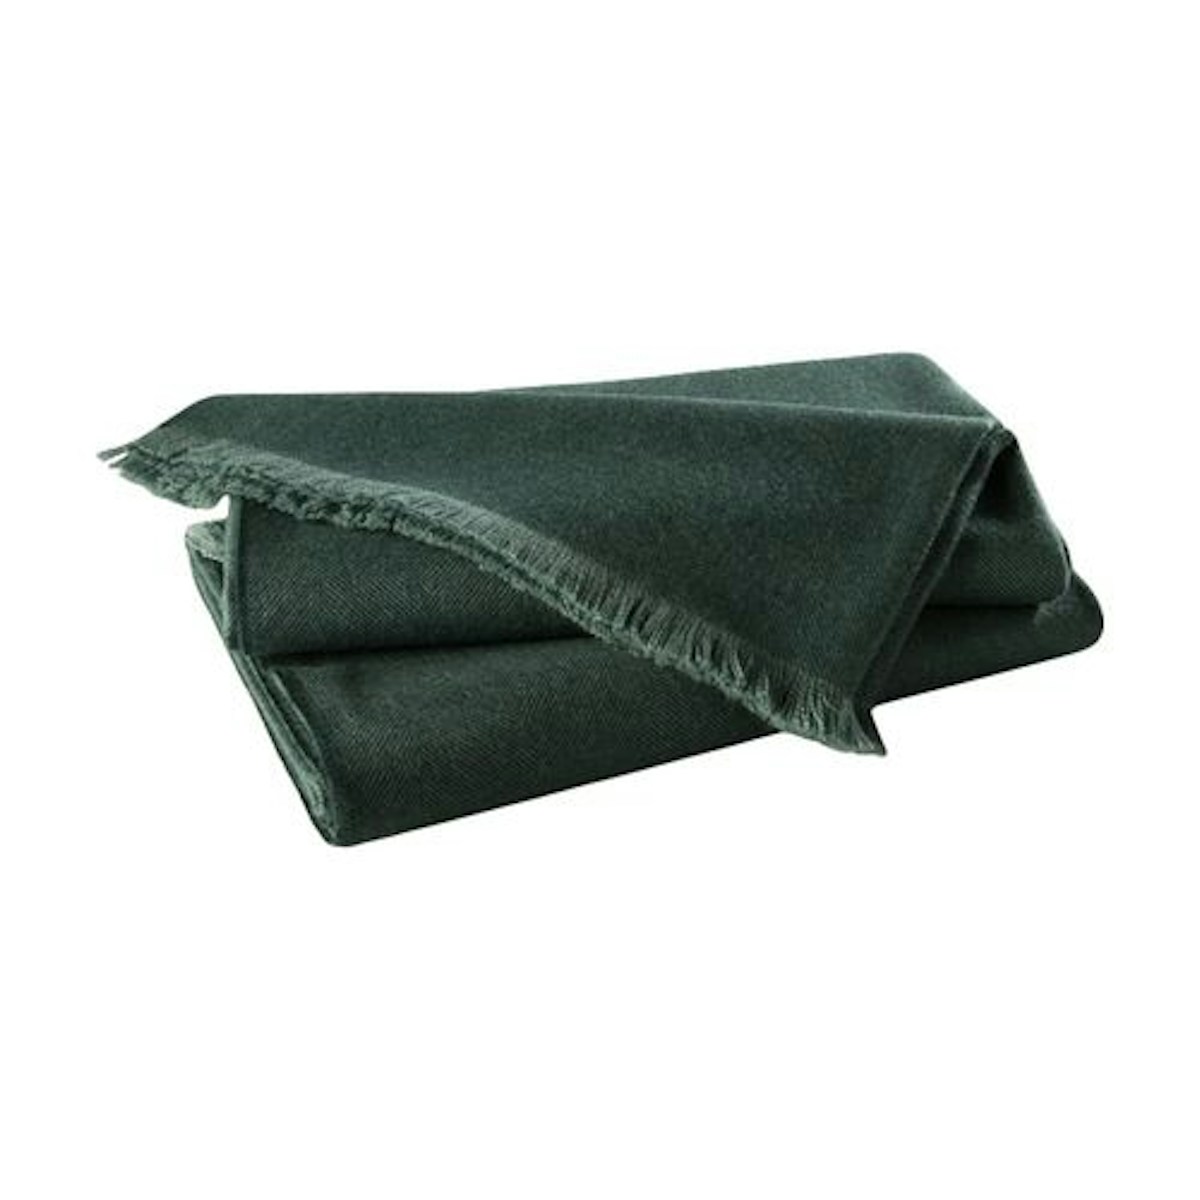 New Wool Throw - 9 Best Luxury Throws and Blankets to Buy for your Home - Style Guide - LuxDeco.com